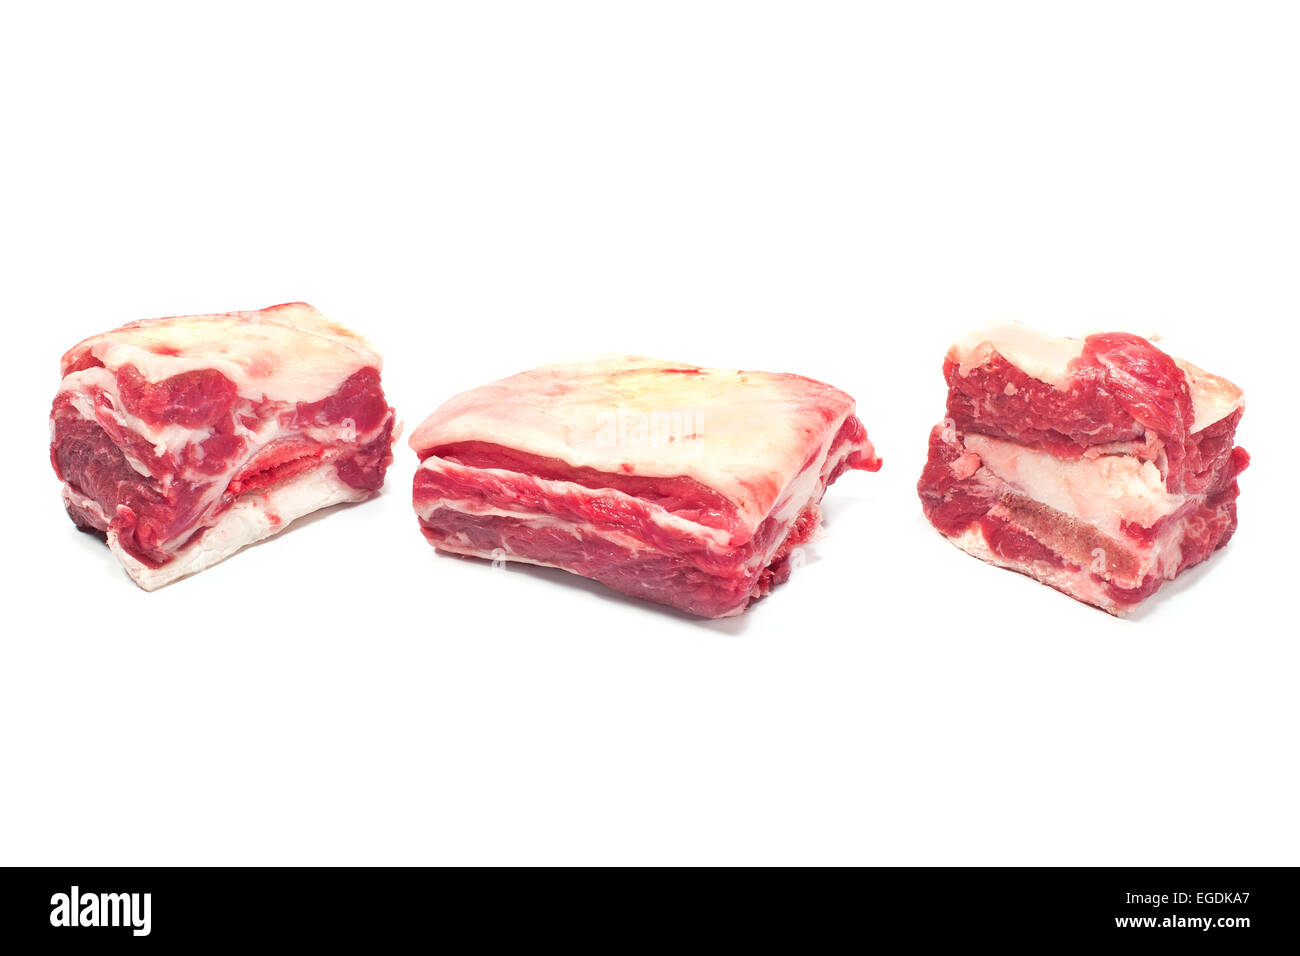 Raw beef ribs on white background Stock Photo